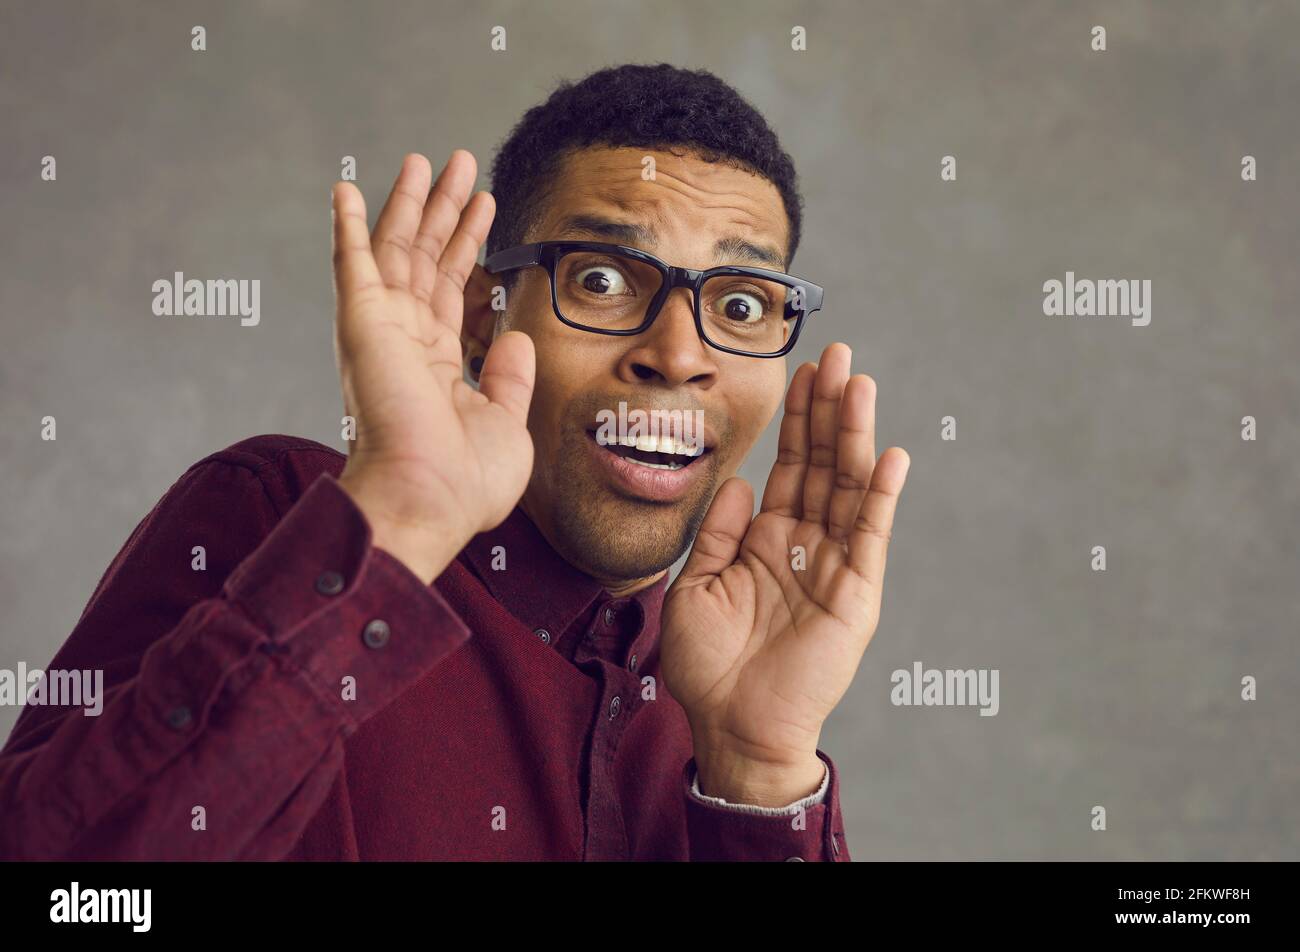 Studio portrait of a scared young black man in glasses looking at the camera and panicking Stock Photo